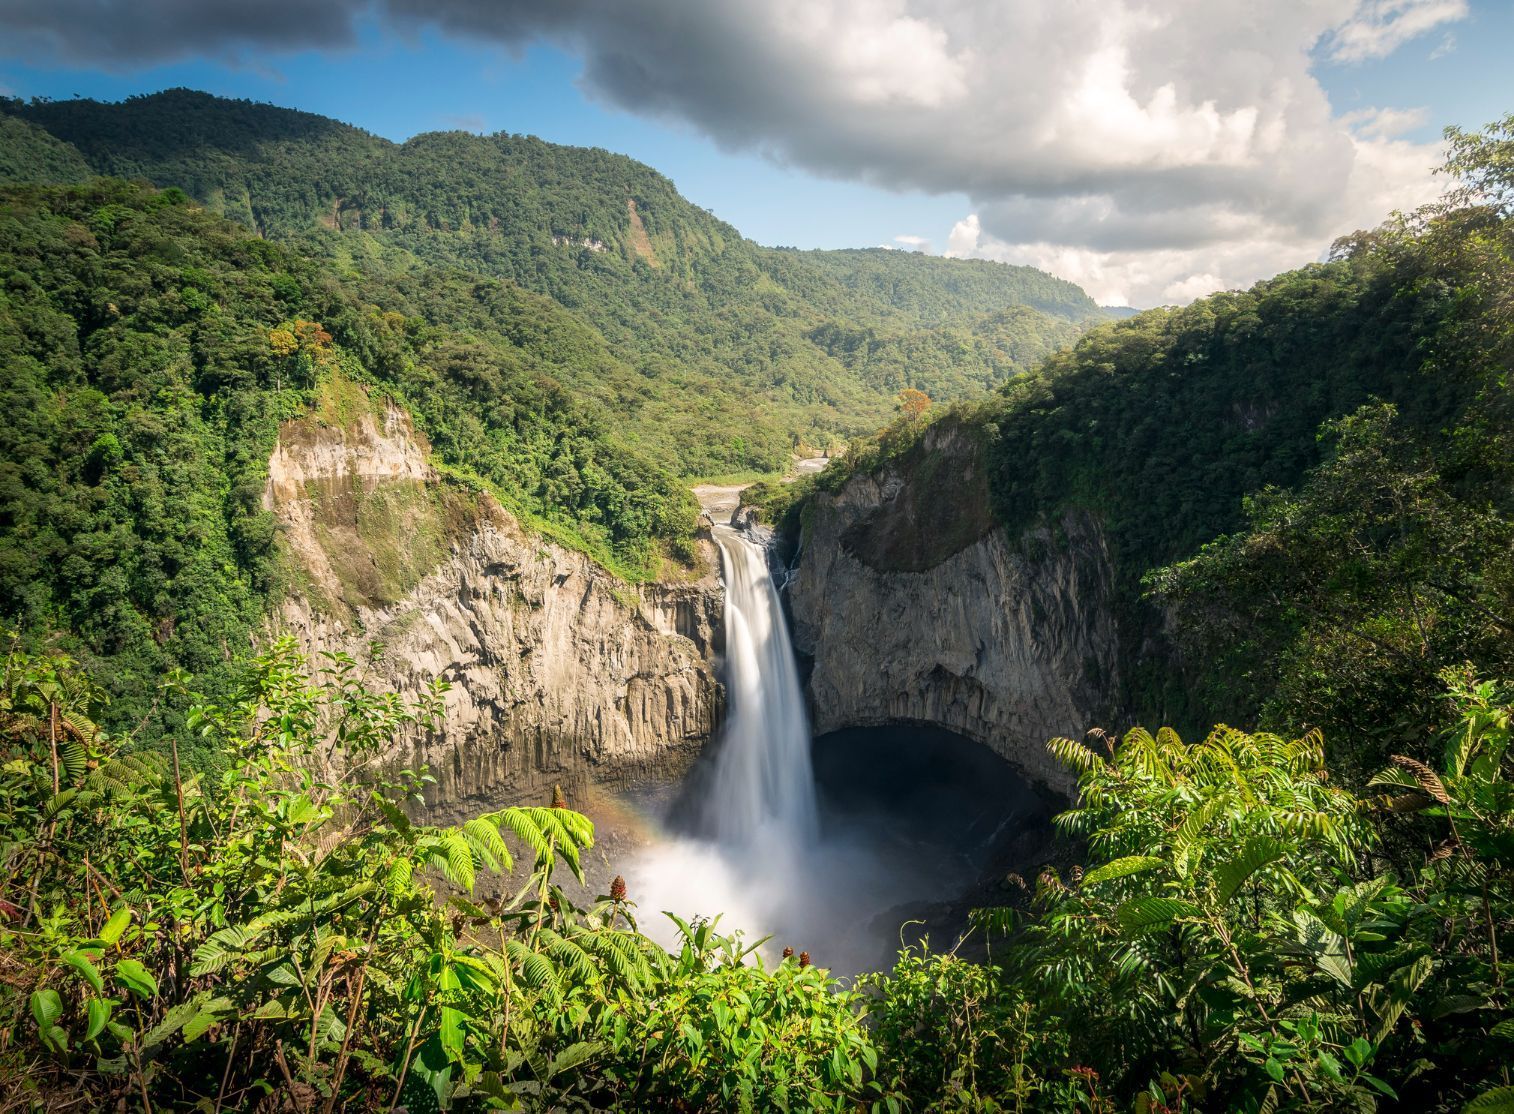 The San Rafael waterfall in Ecuador. The country's corner of the Amazon is one of the most biodiverse places on Earth. Photo: Getty